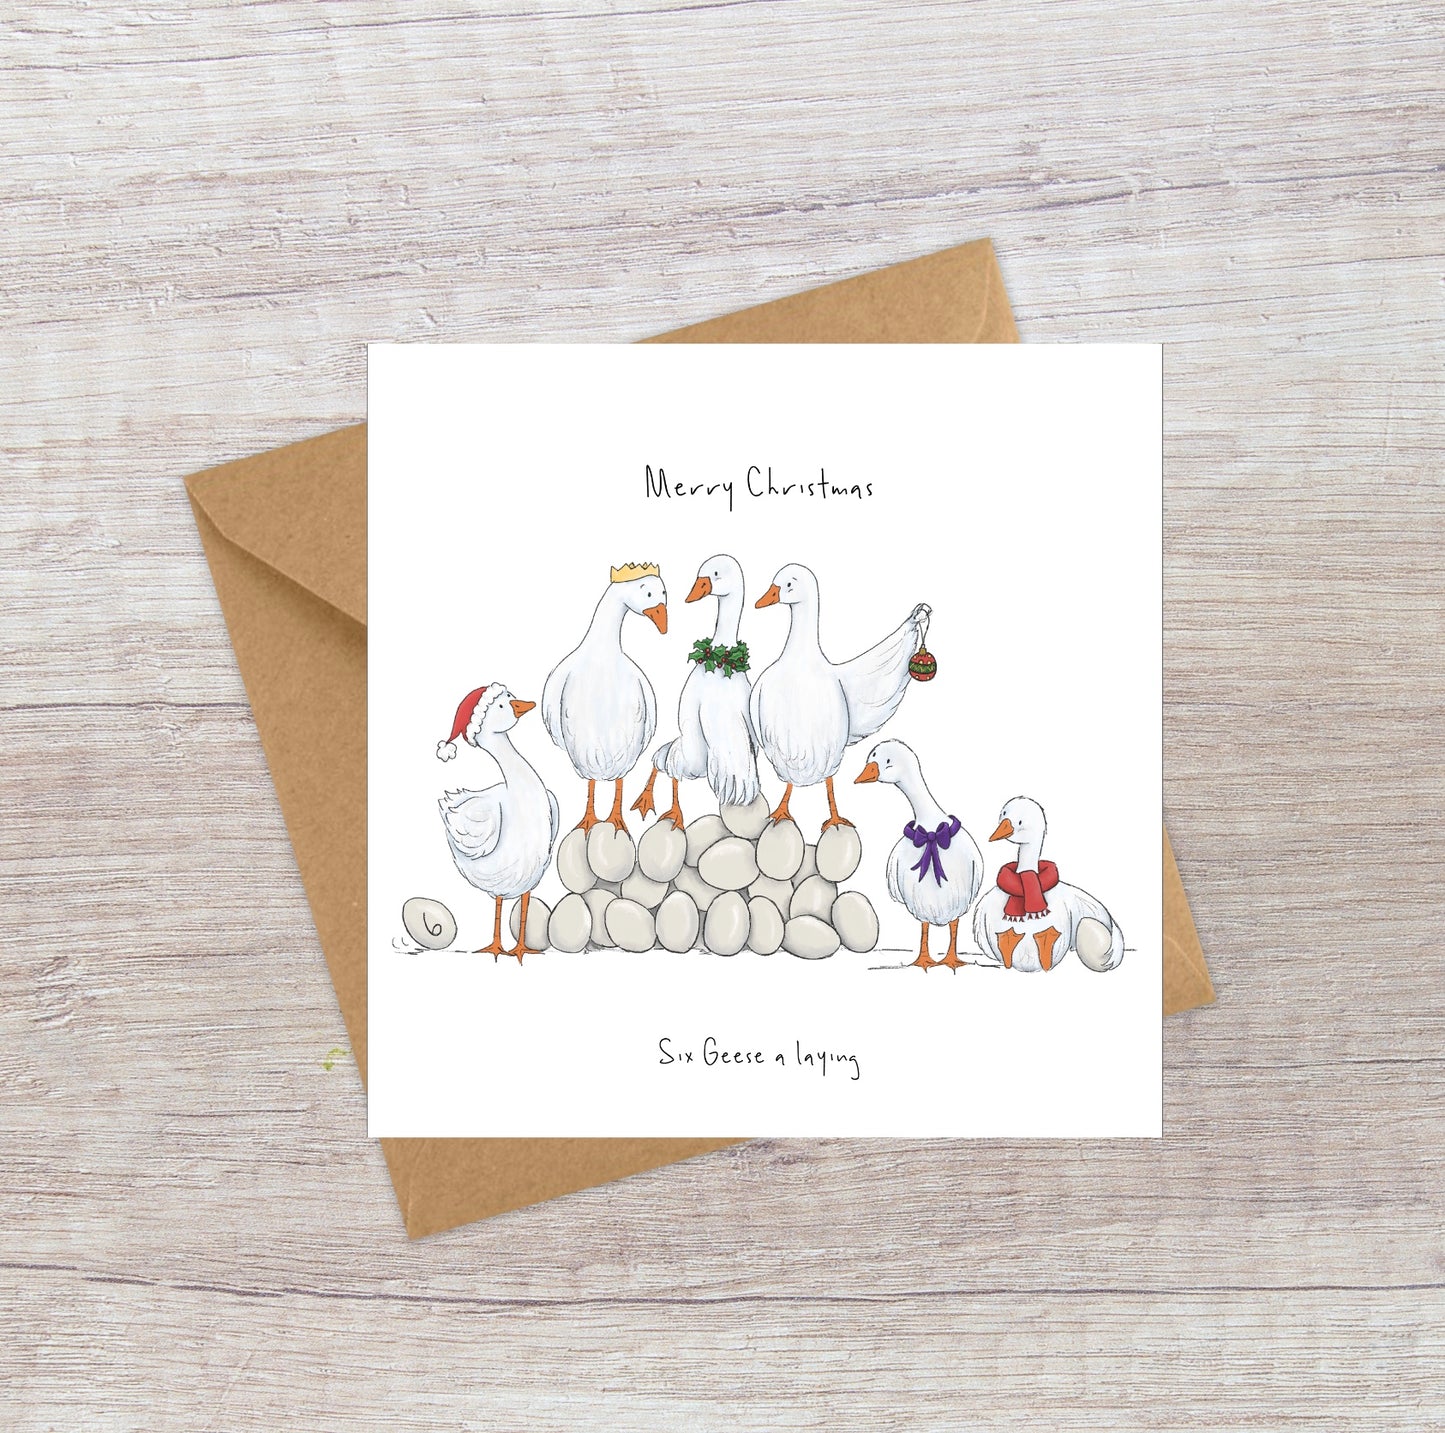 Six Geese a Laying - Twelve Days of Christmas card